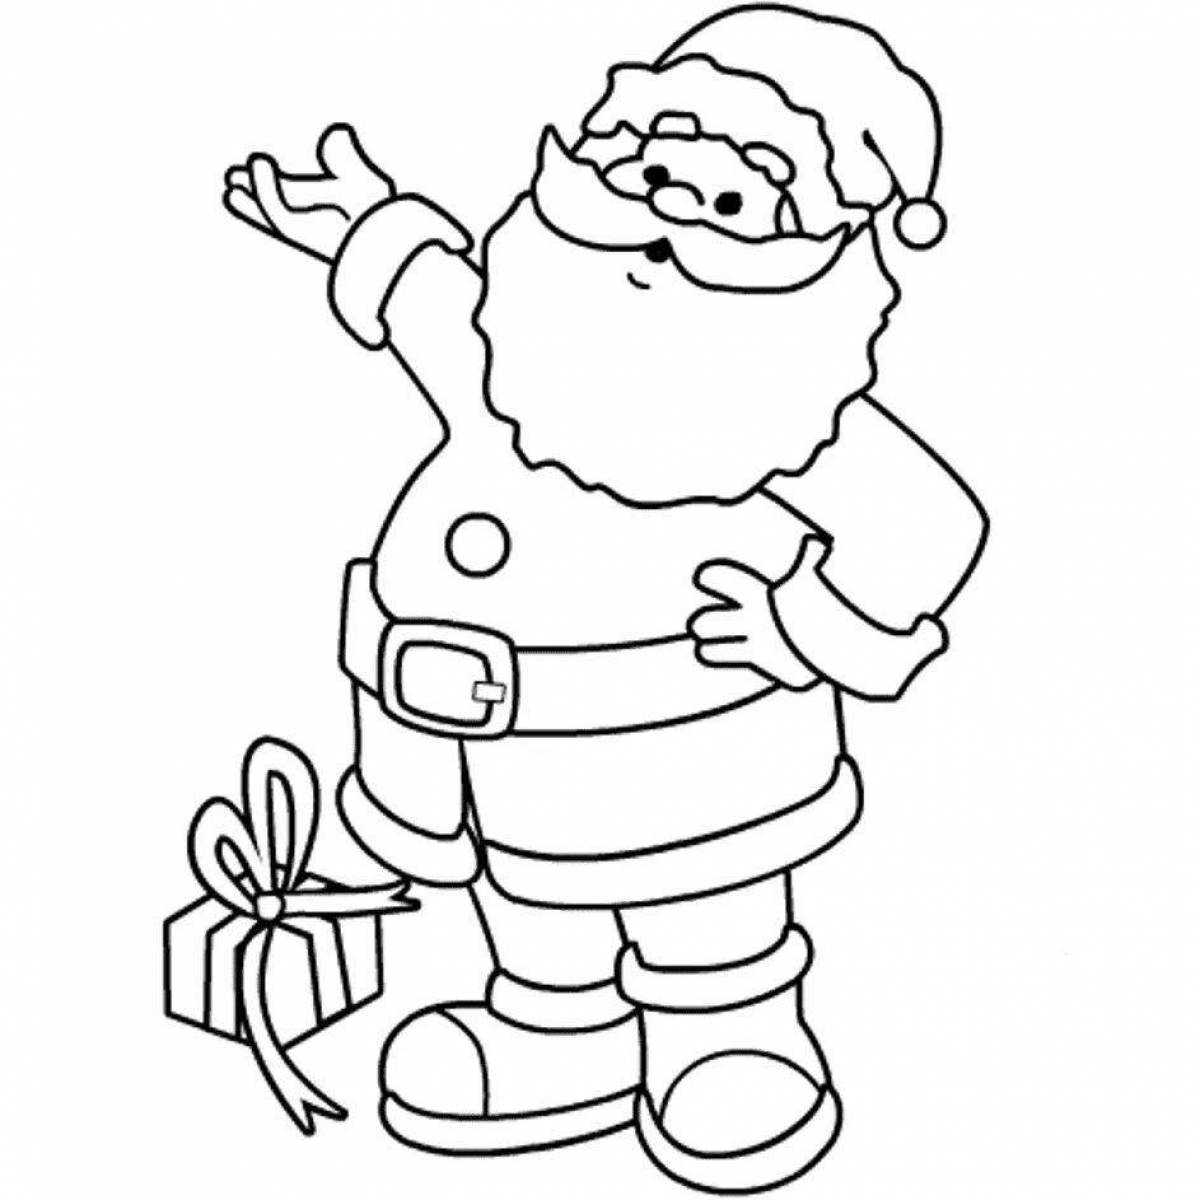 Great frost coloring book for kids